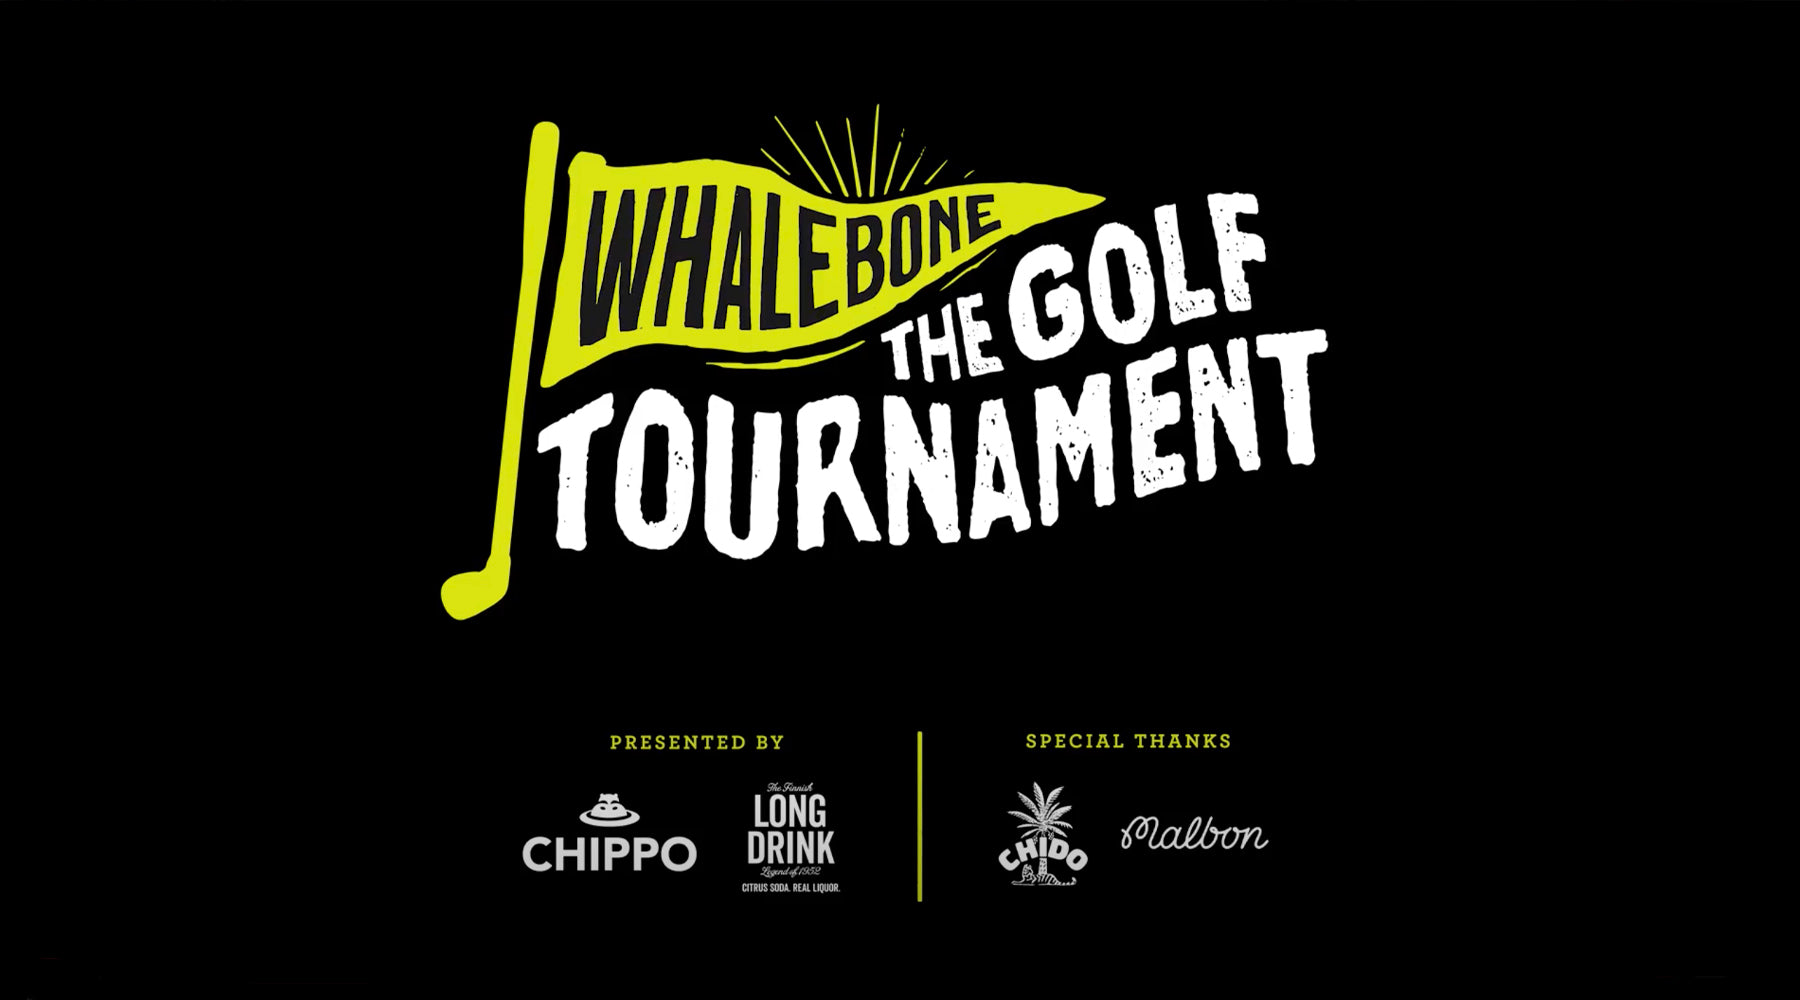 Chippo does Whalebone: The Golf Tournament